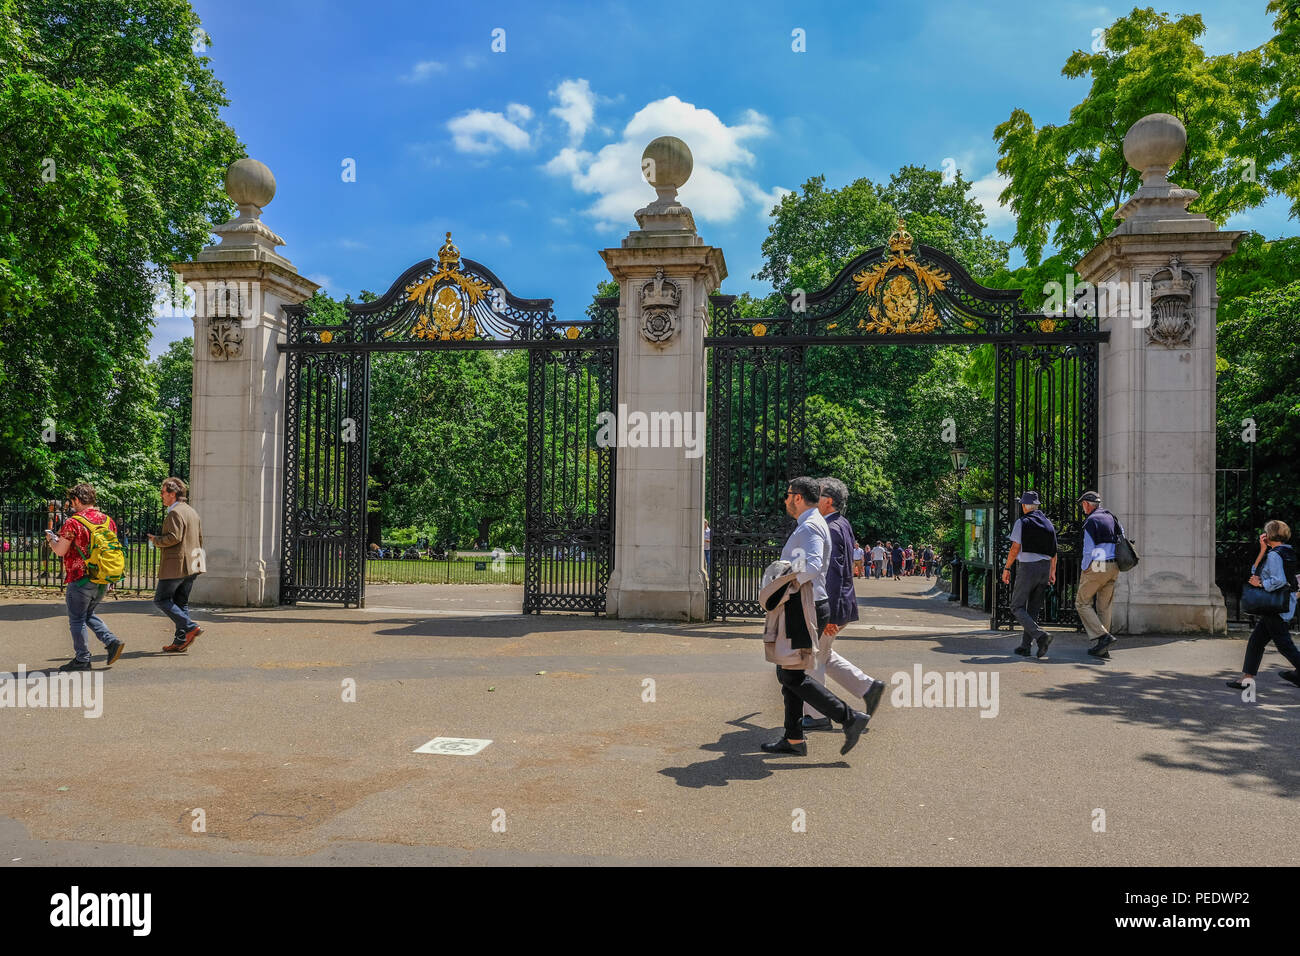 Mall, London, Uk - June 8, 2018:  View of the magnificent Malborough Gates on the Mall in central London, entrance to the park. Stock Photo